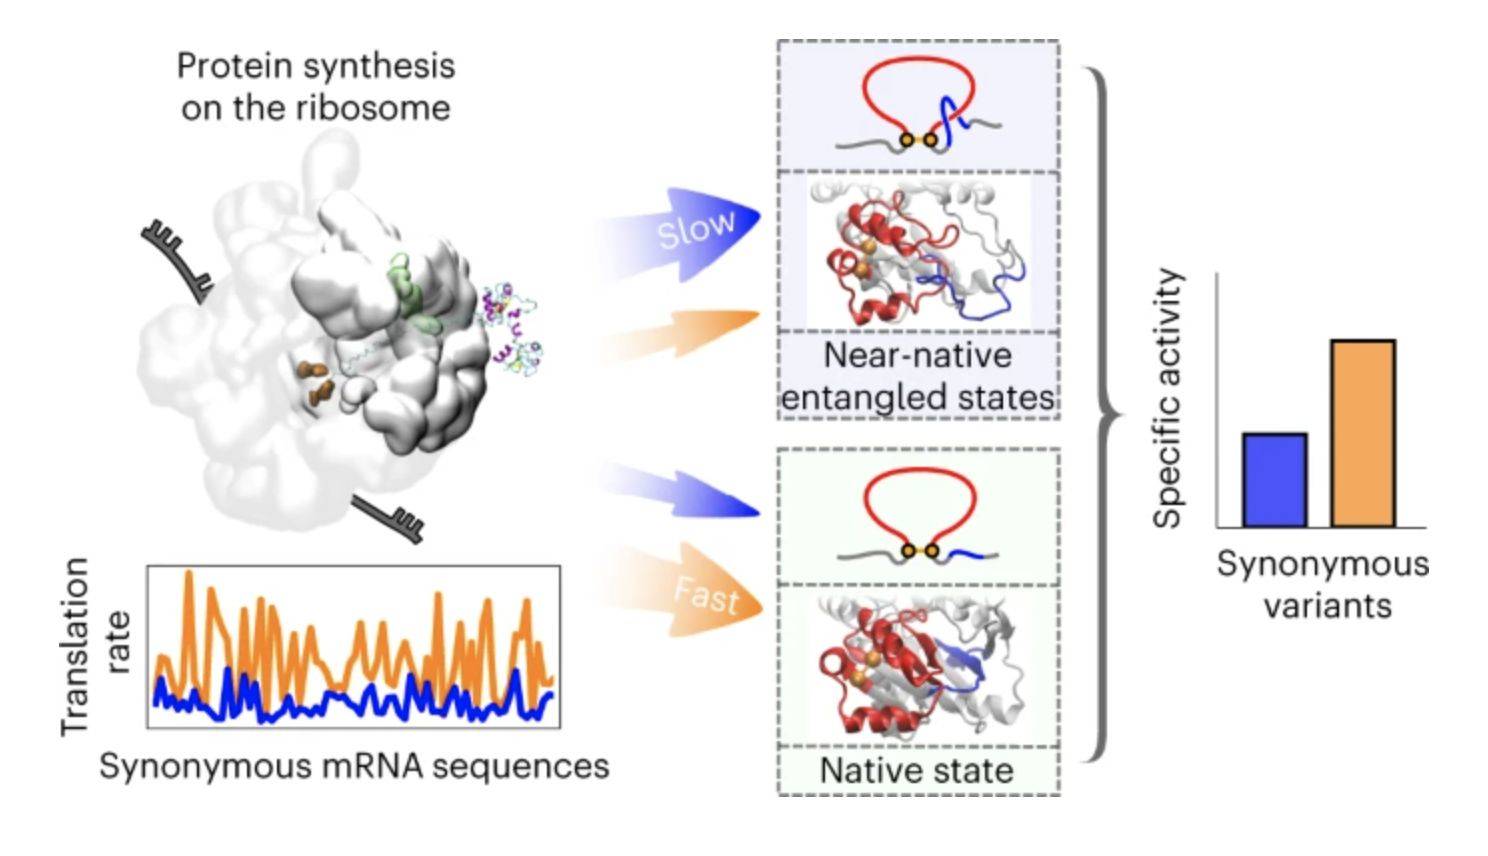 Synonymous mutations alter enzyme structure and function over long timescales (Wei Gu, et al., 2015)